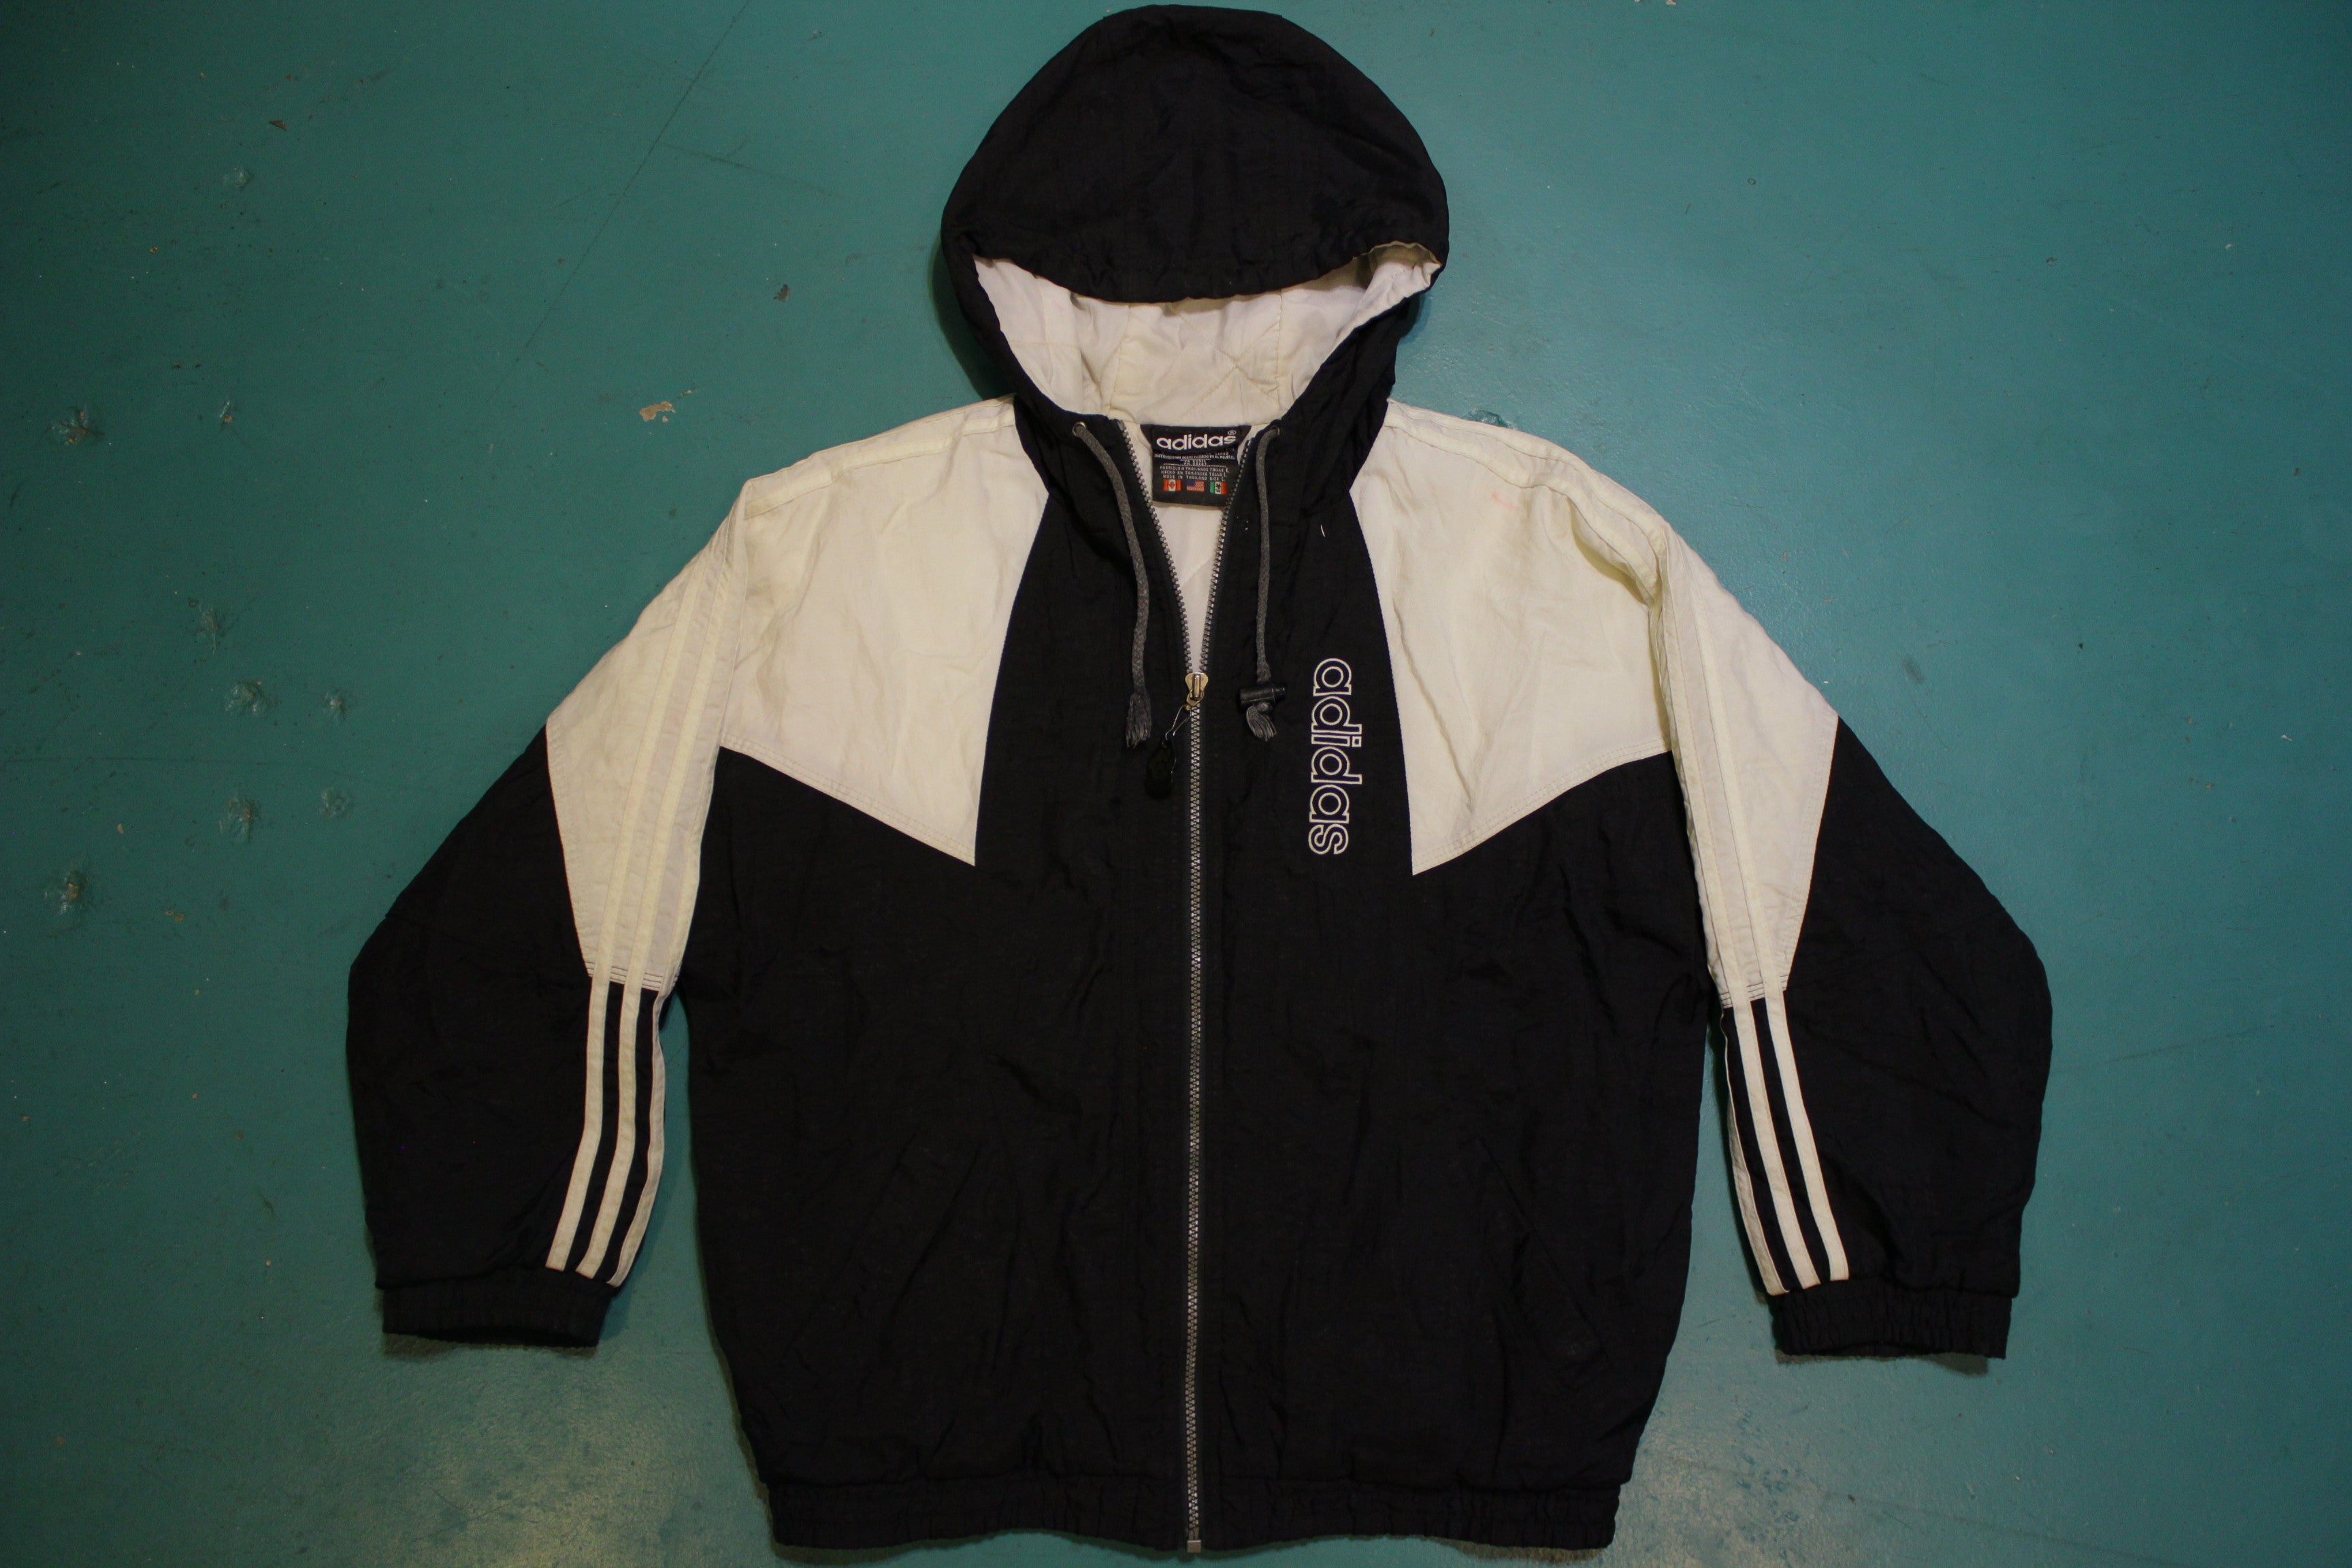 Adidas Black and White Vintage 90's Colorblock Trefoil Logo Puffy